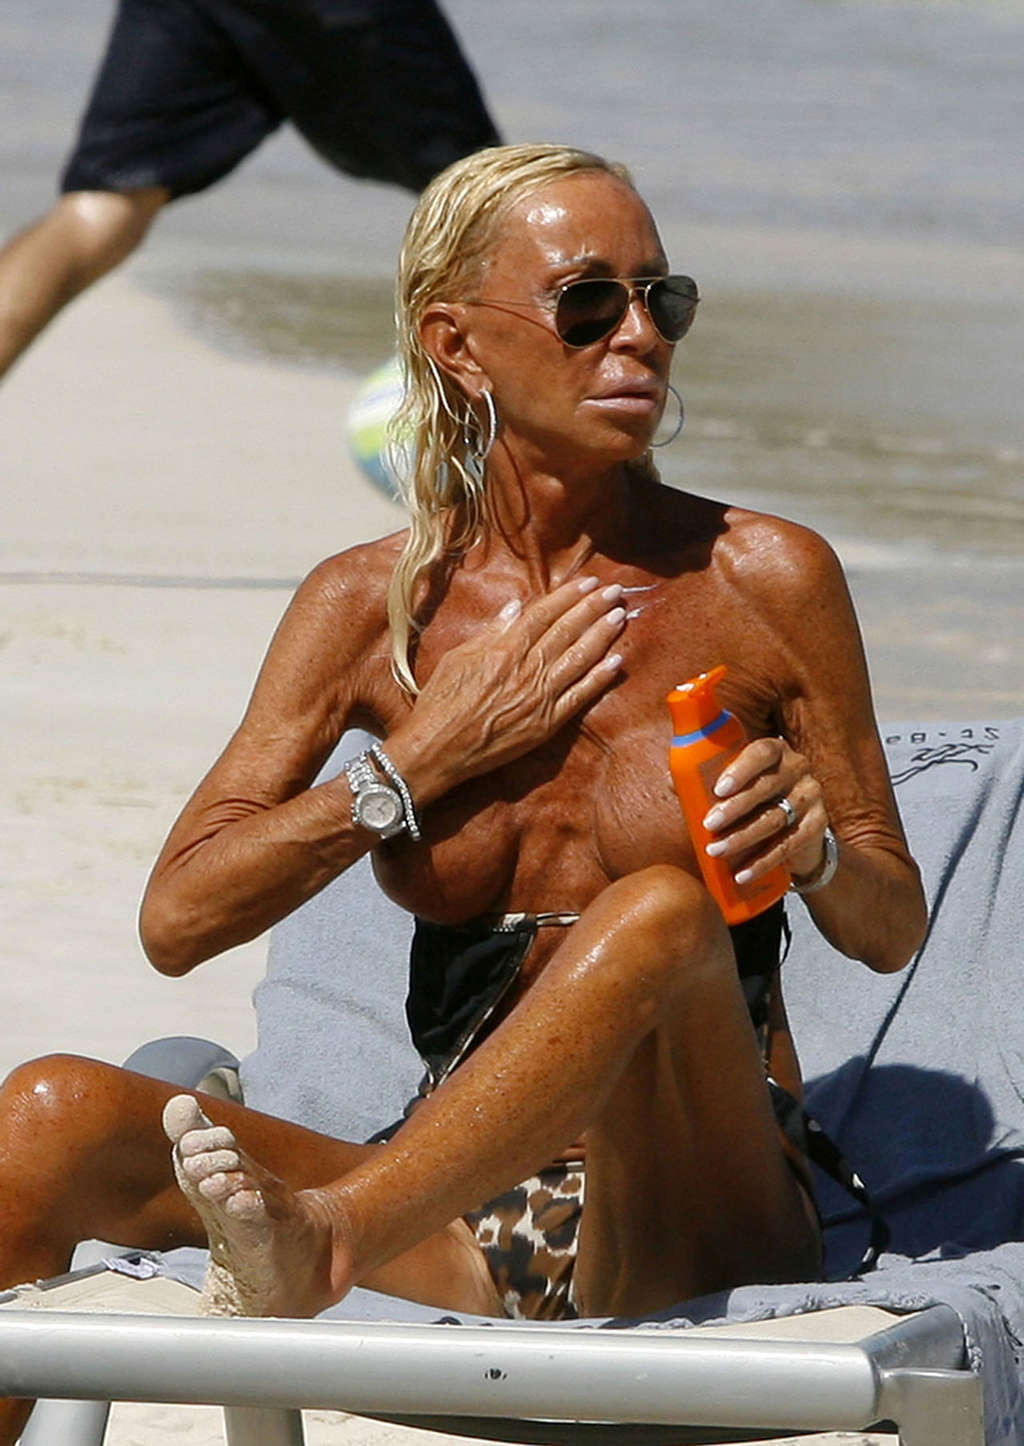 Donatella Versace cought exposing her big tits on beach paparazzi pictures #75362520